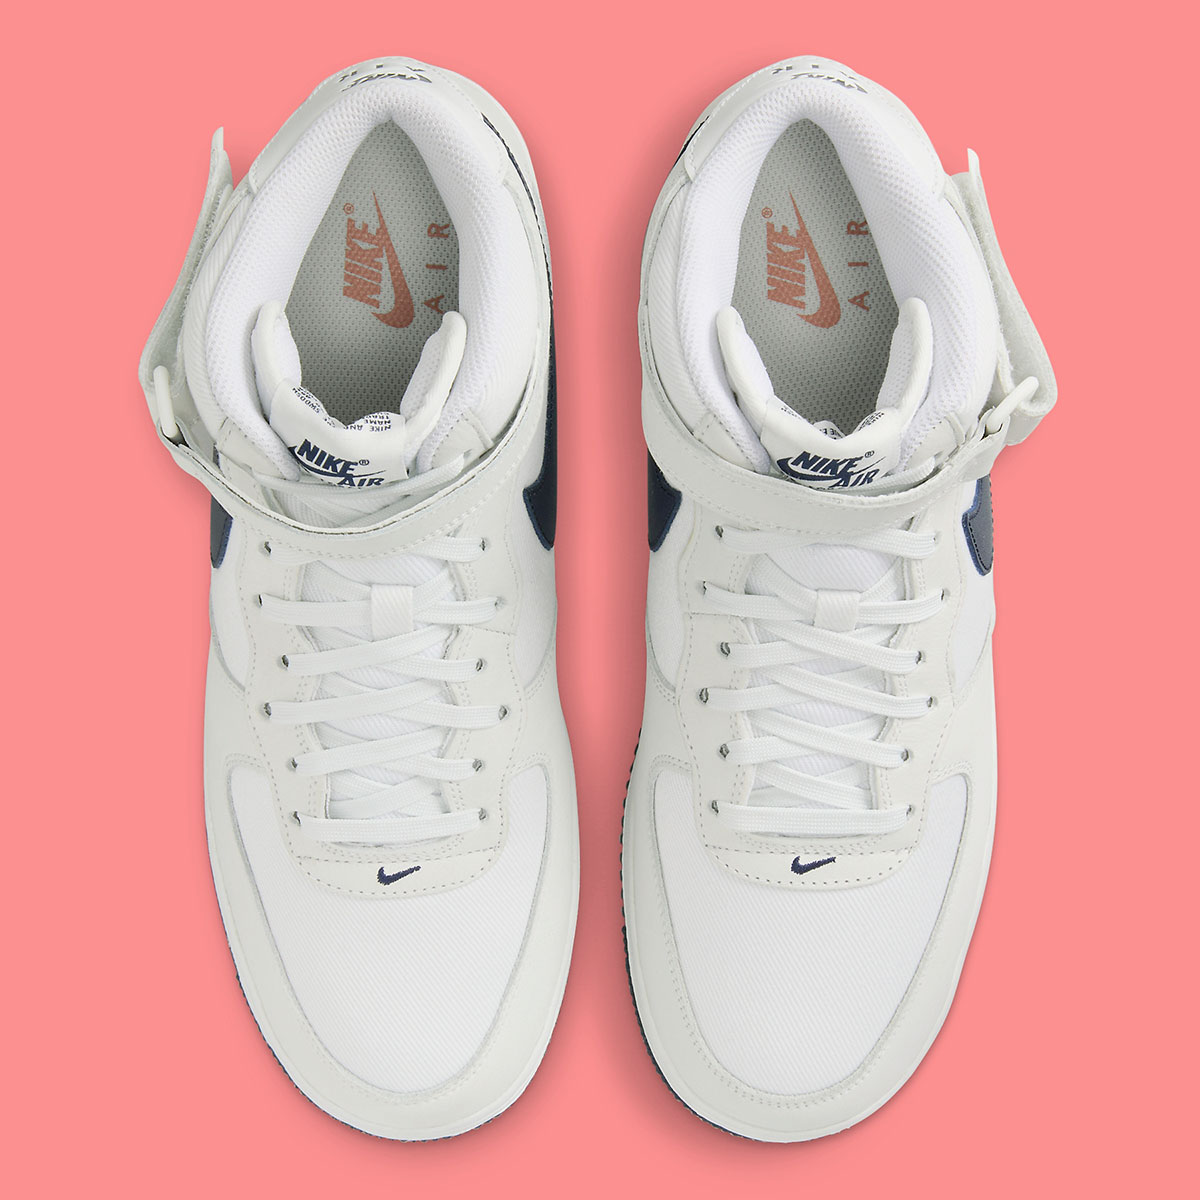 Une collection sacai x Nike New Cortez en approche Mid Summit White Obsidian Pink Fb8879 100 4